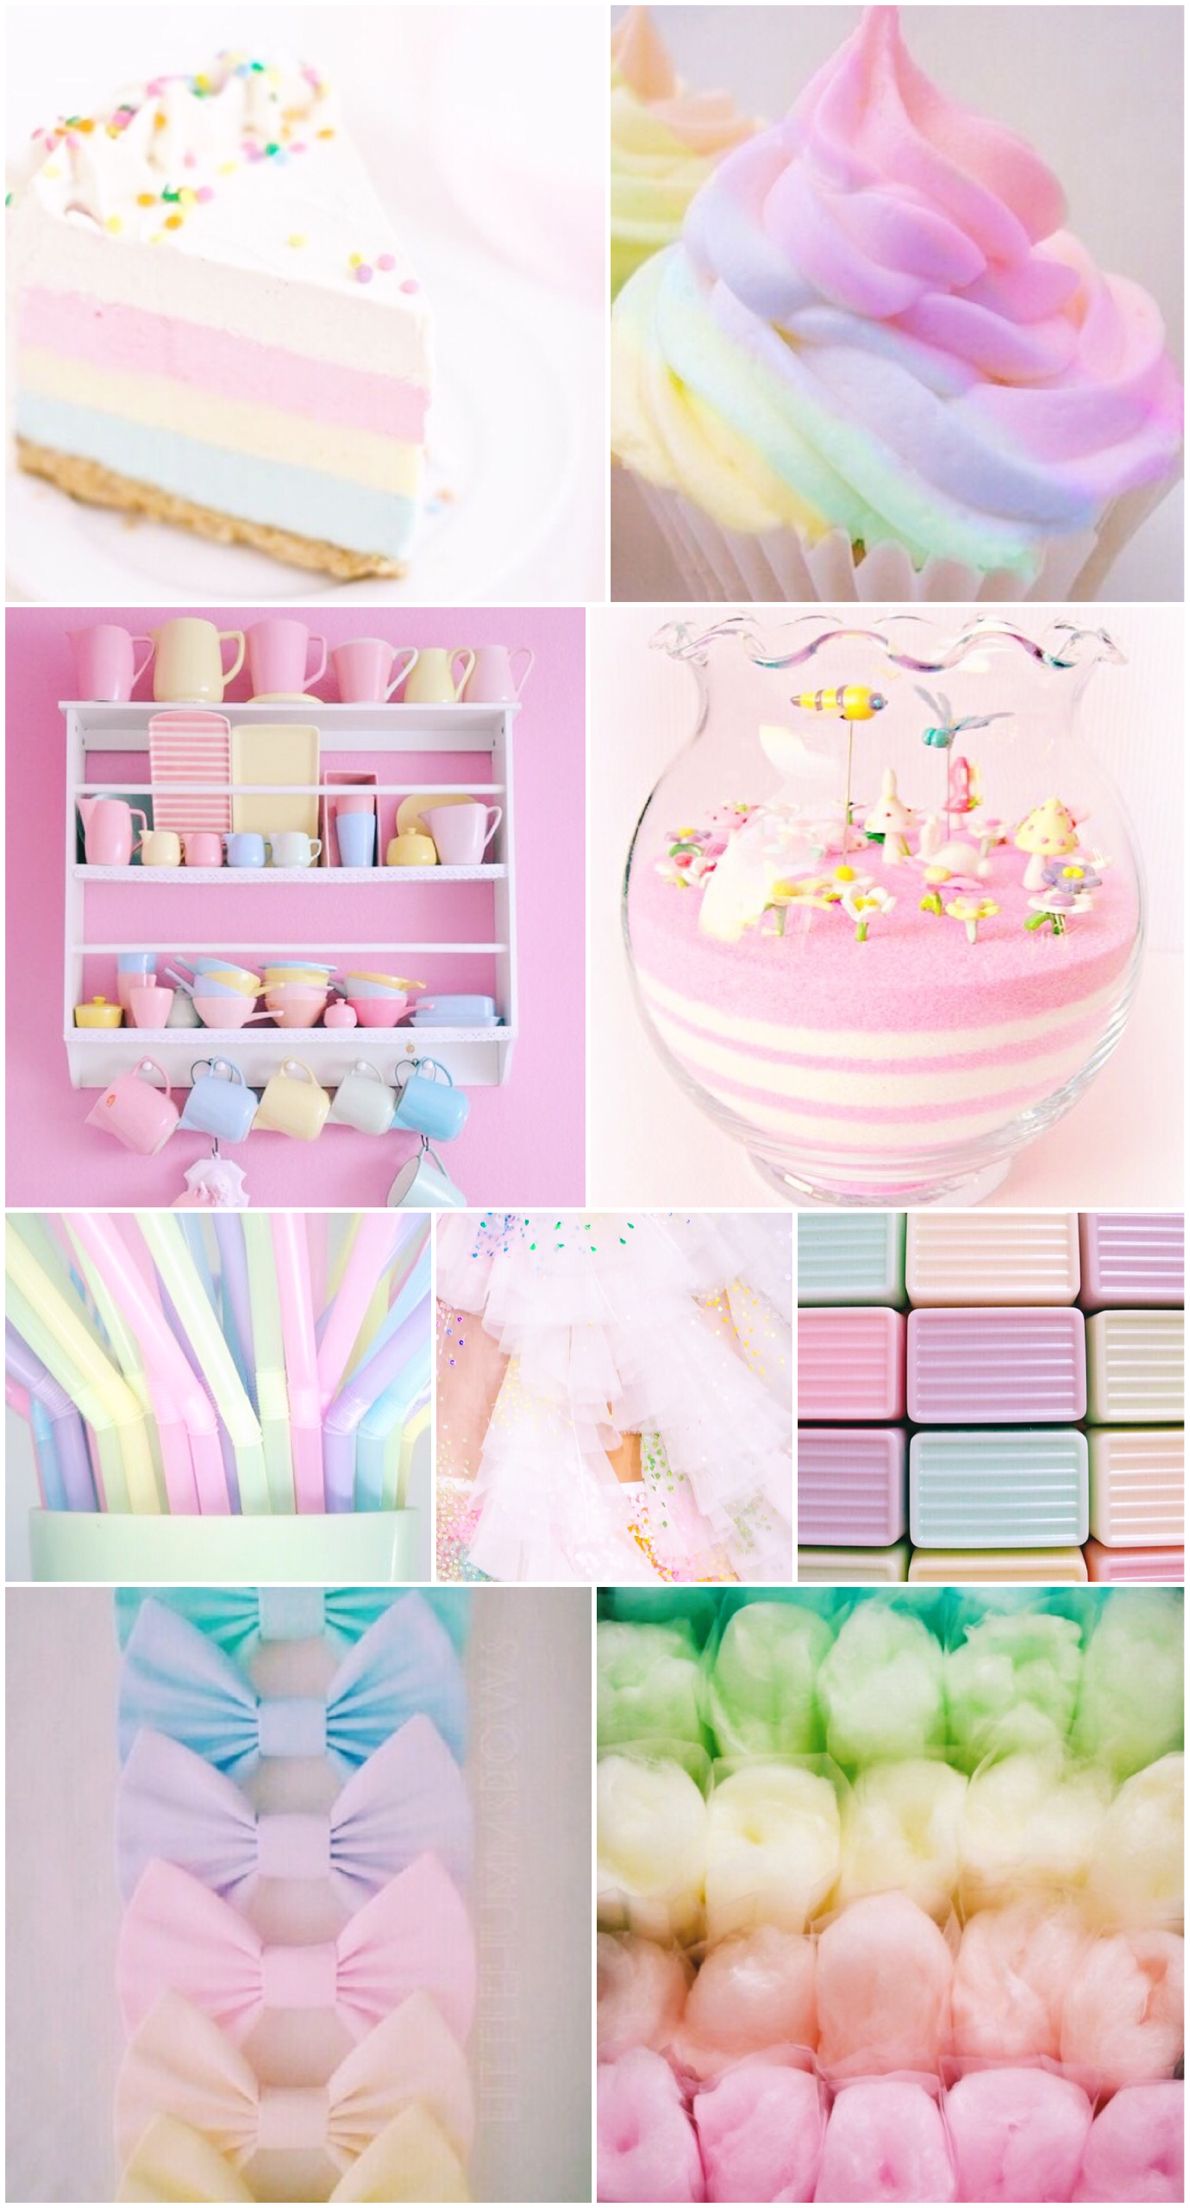 Wallpaper Pastel Rainbow Background Iphone Pretty Candy